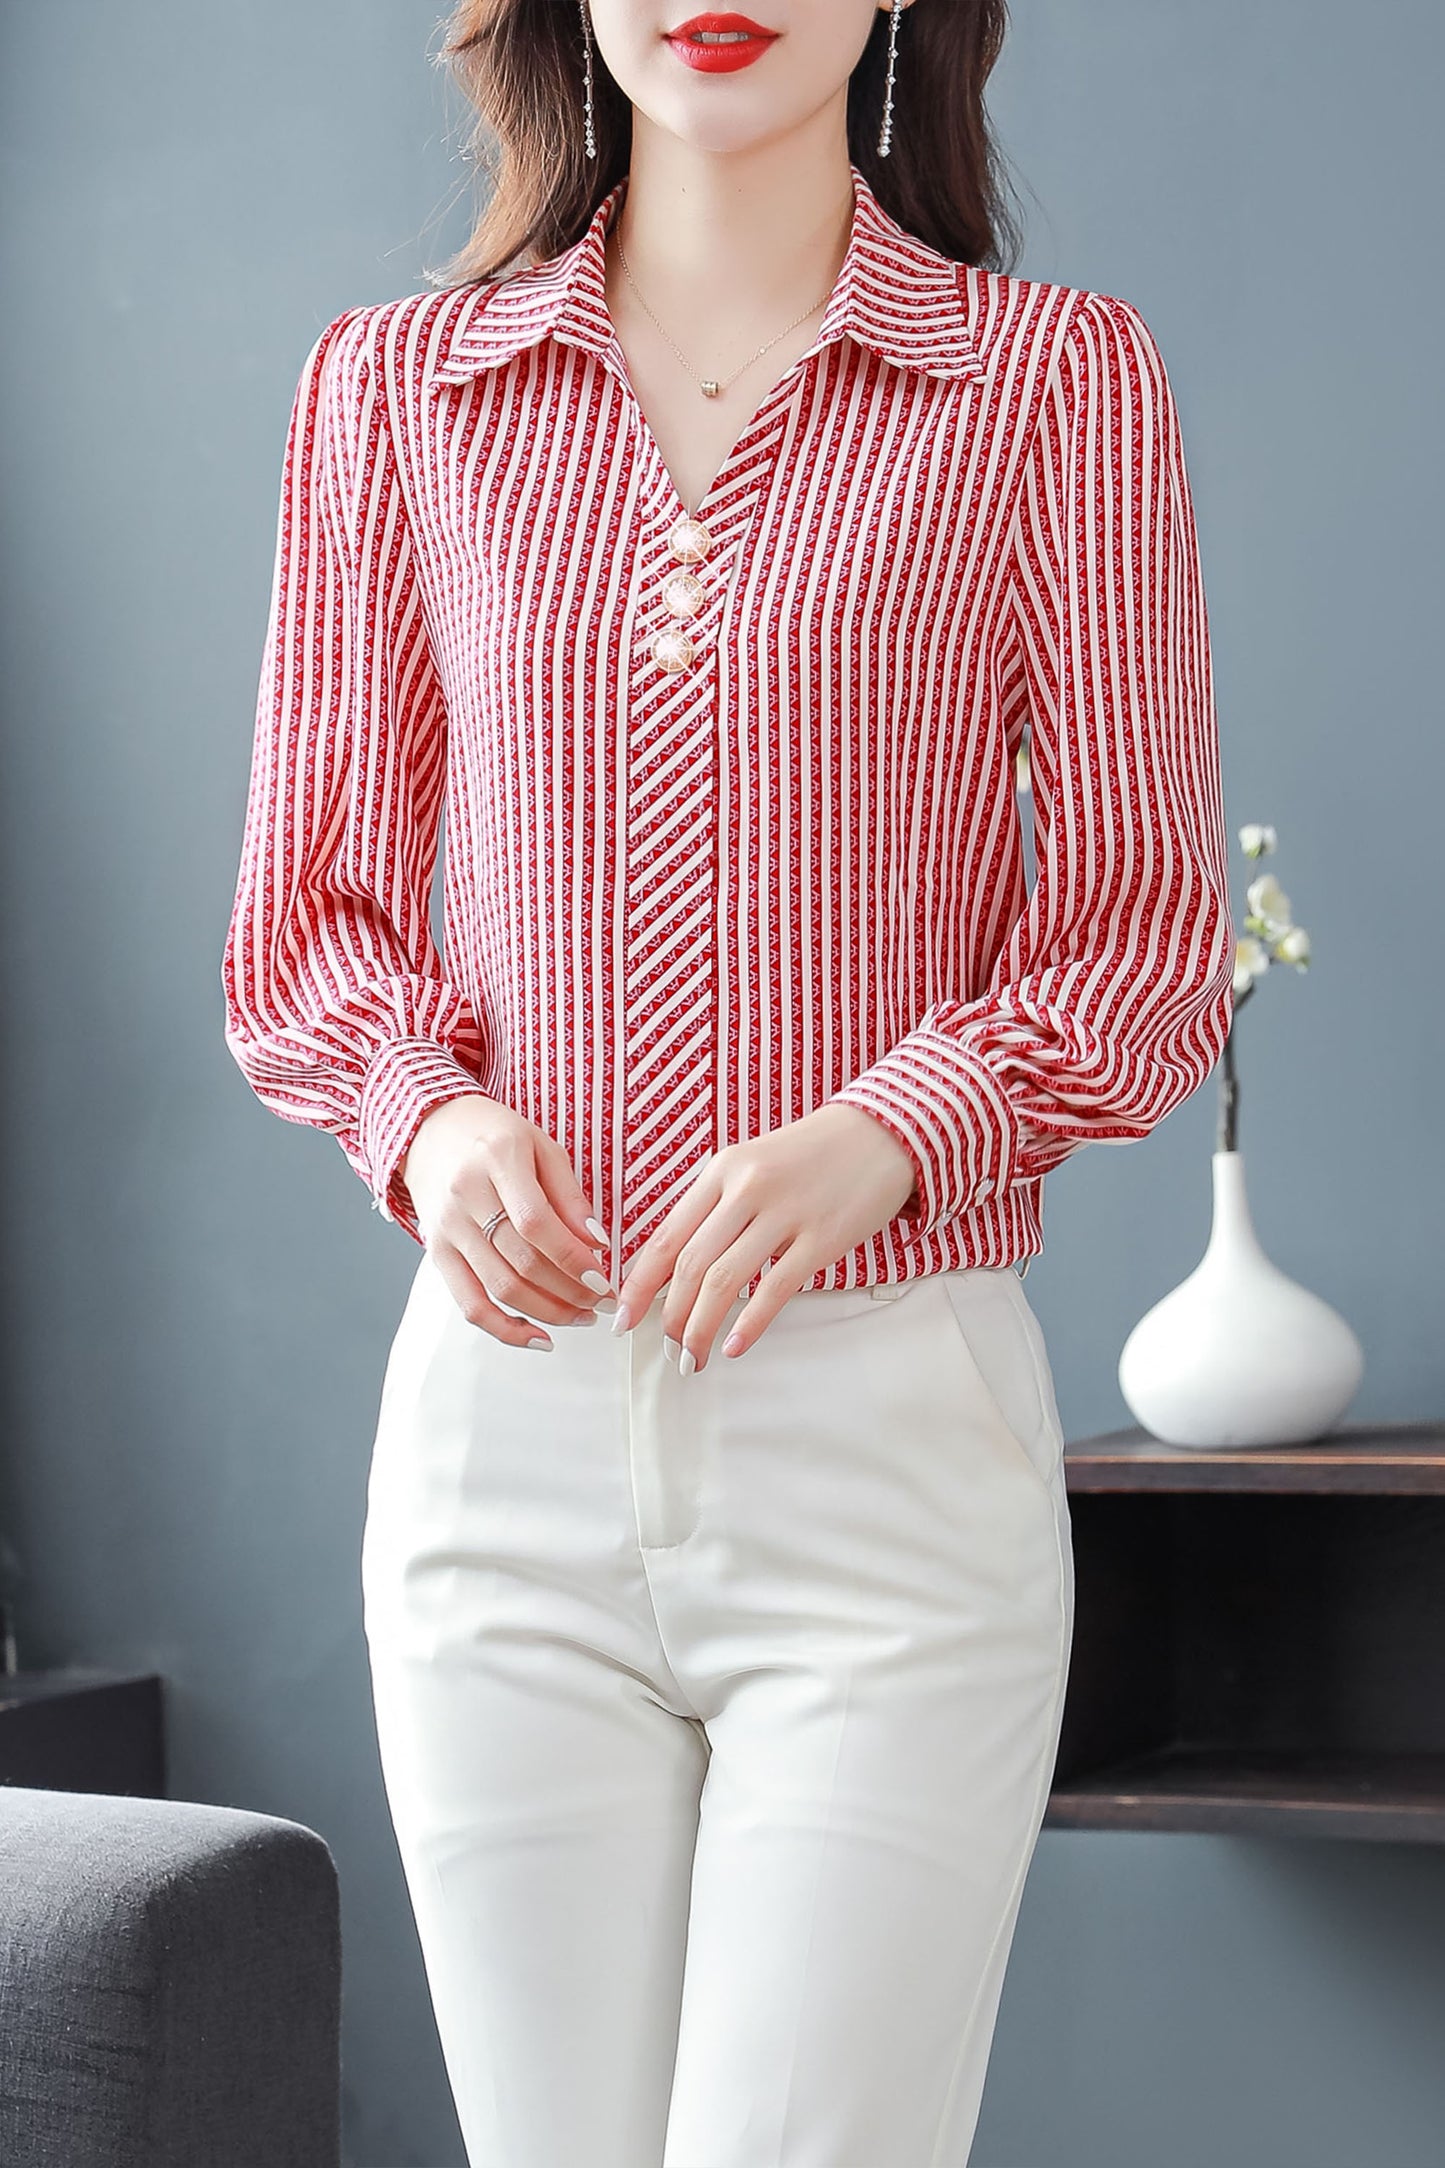 Red Stripe Tops Collared Neck Long Sleeves Print Blouse